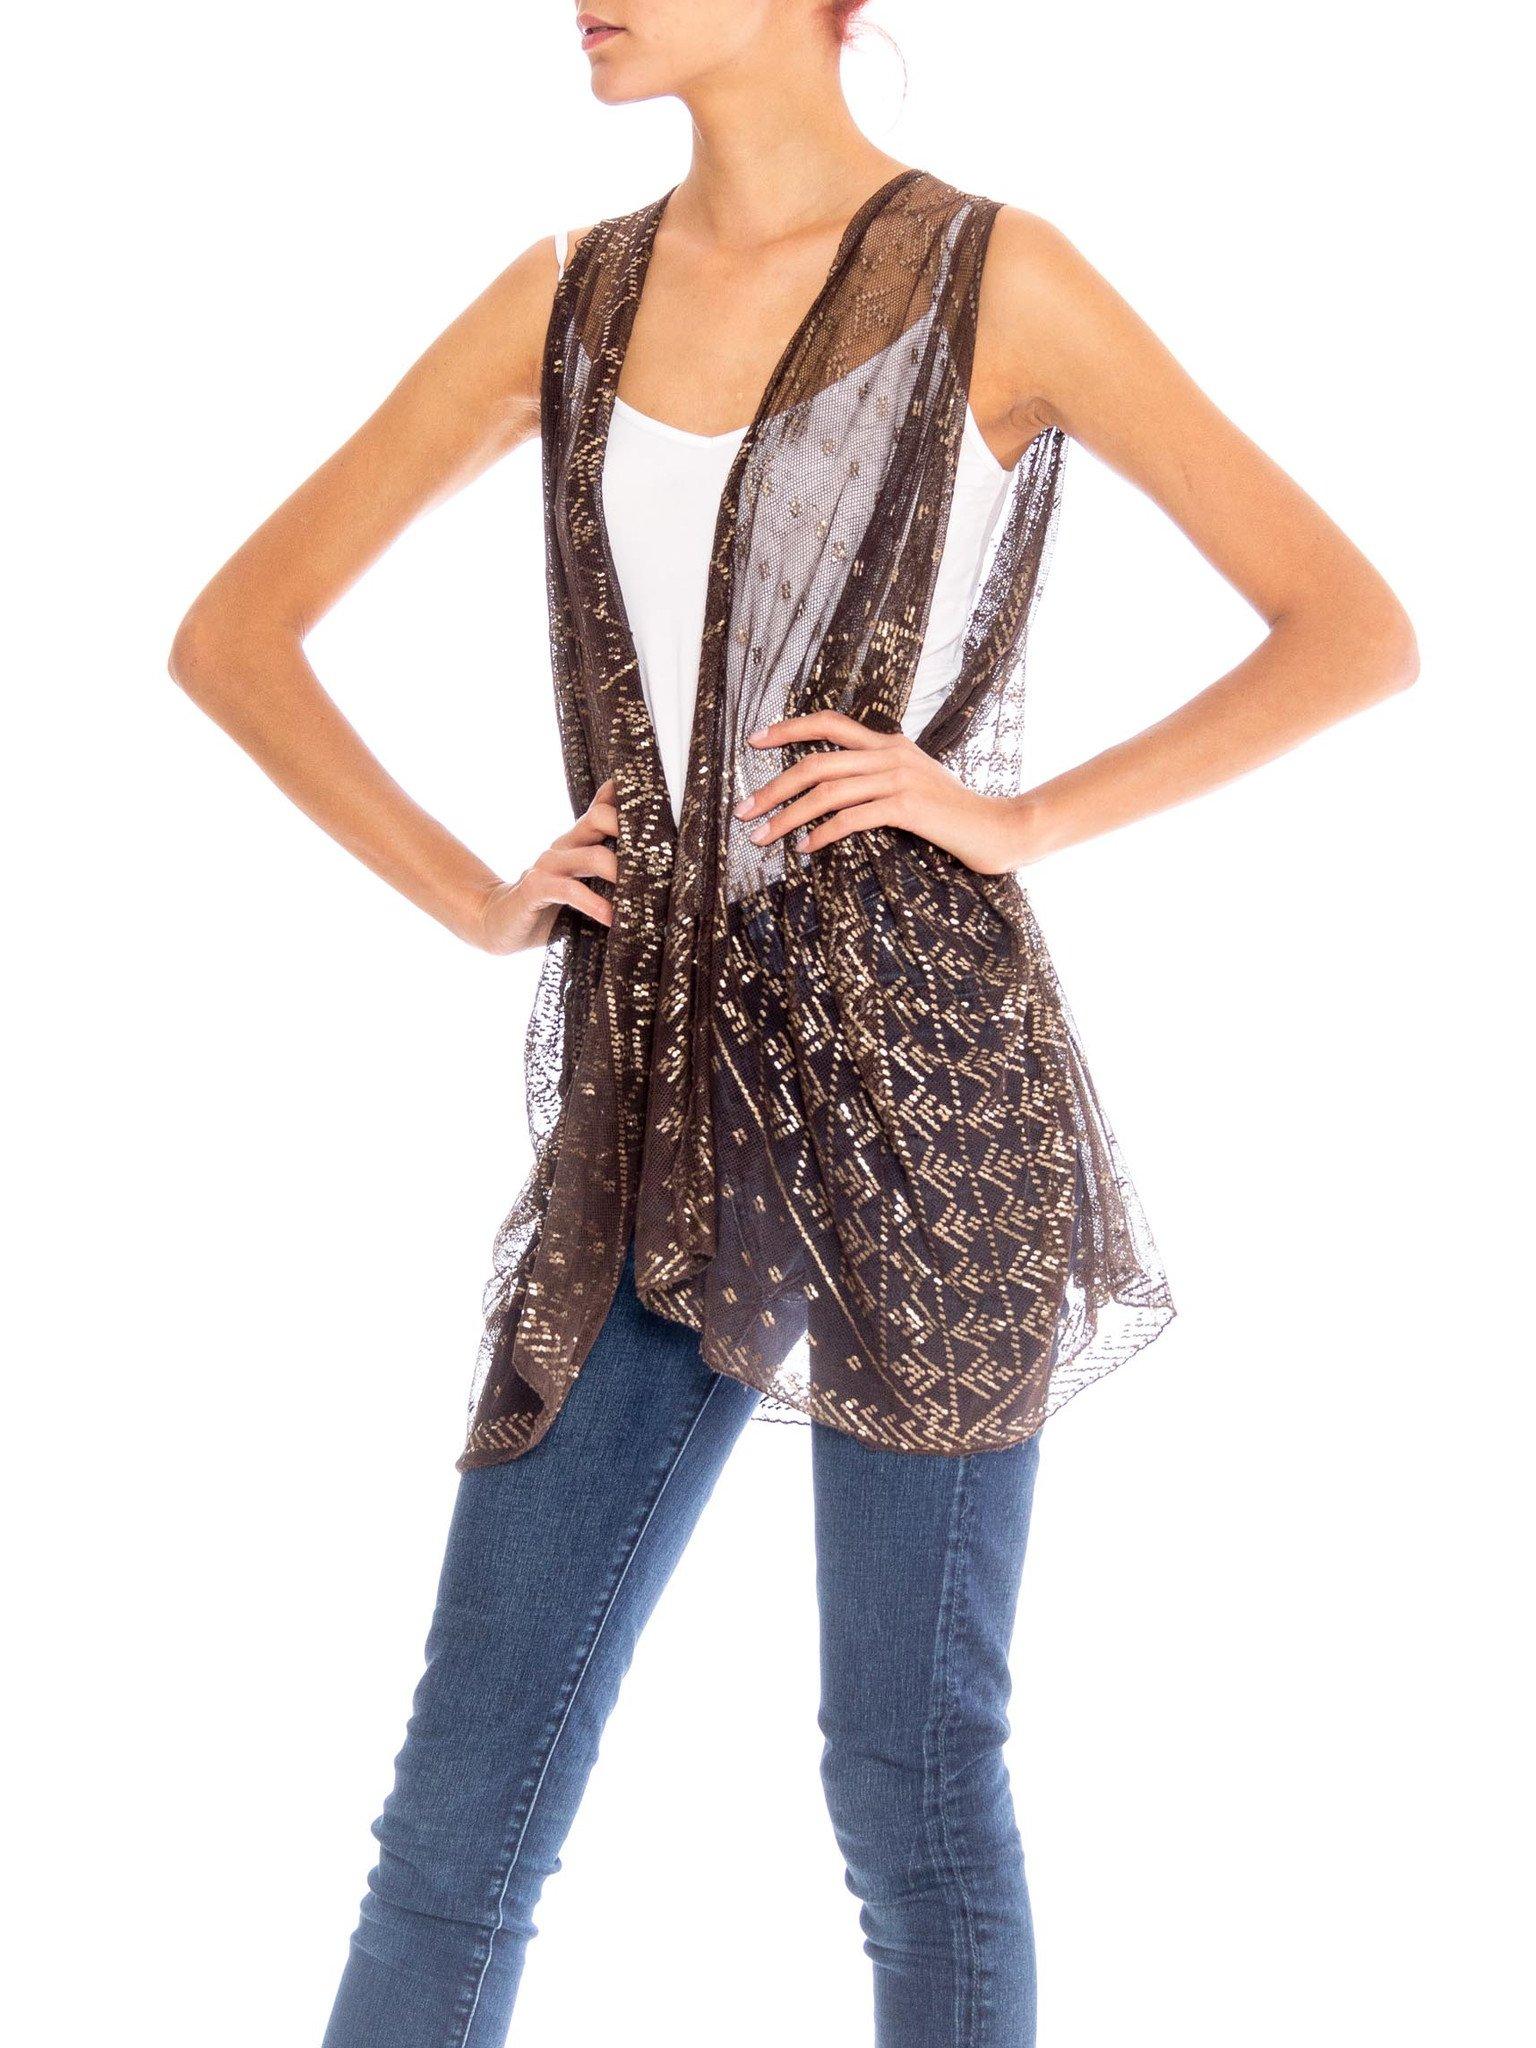 Women's MORPHEW COLLECTION Chocolate Brown & Silver Egyptian Assuit Sheer Draped Vest For Sale